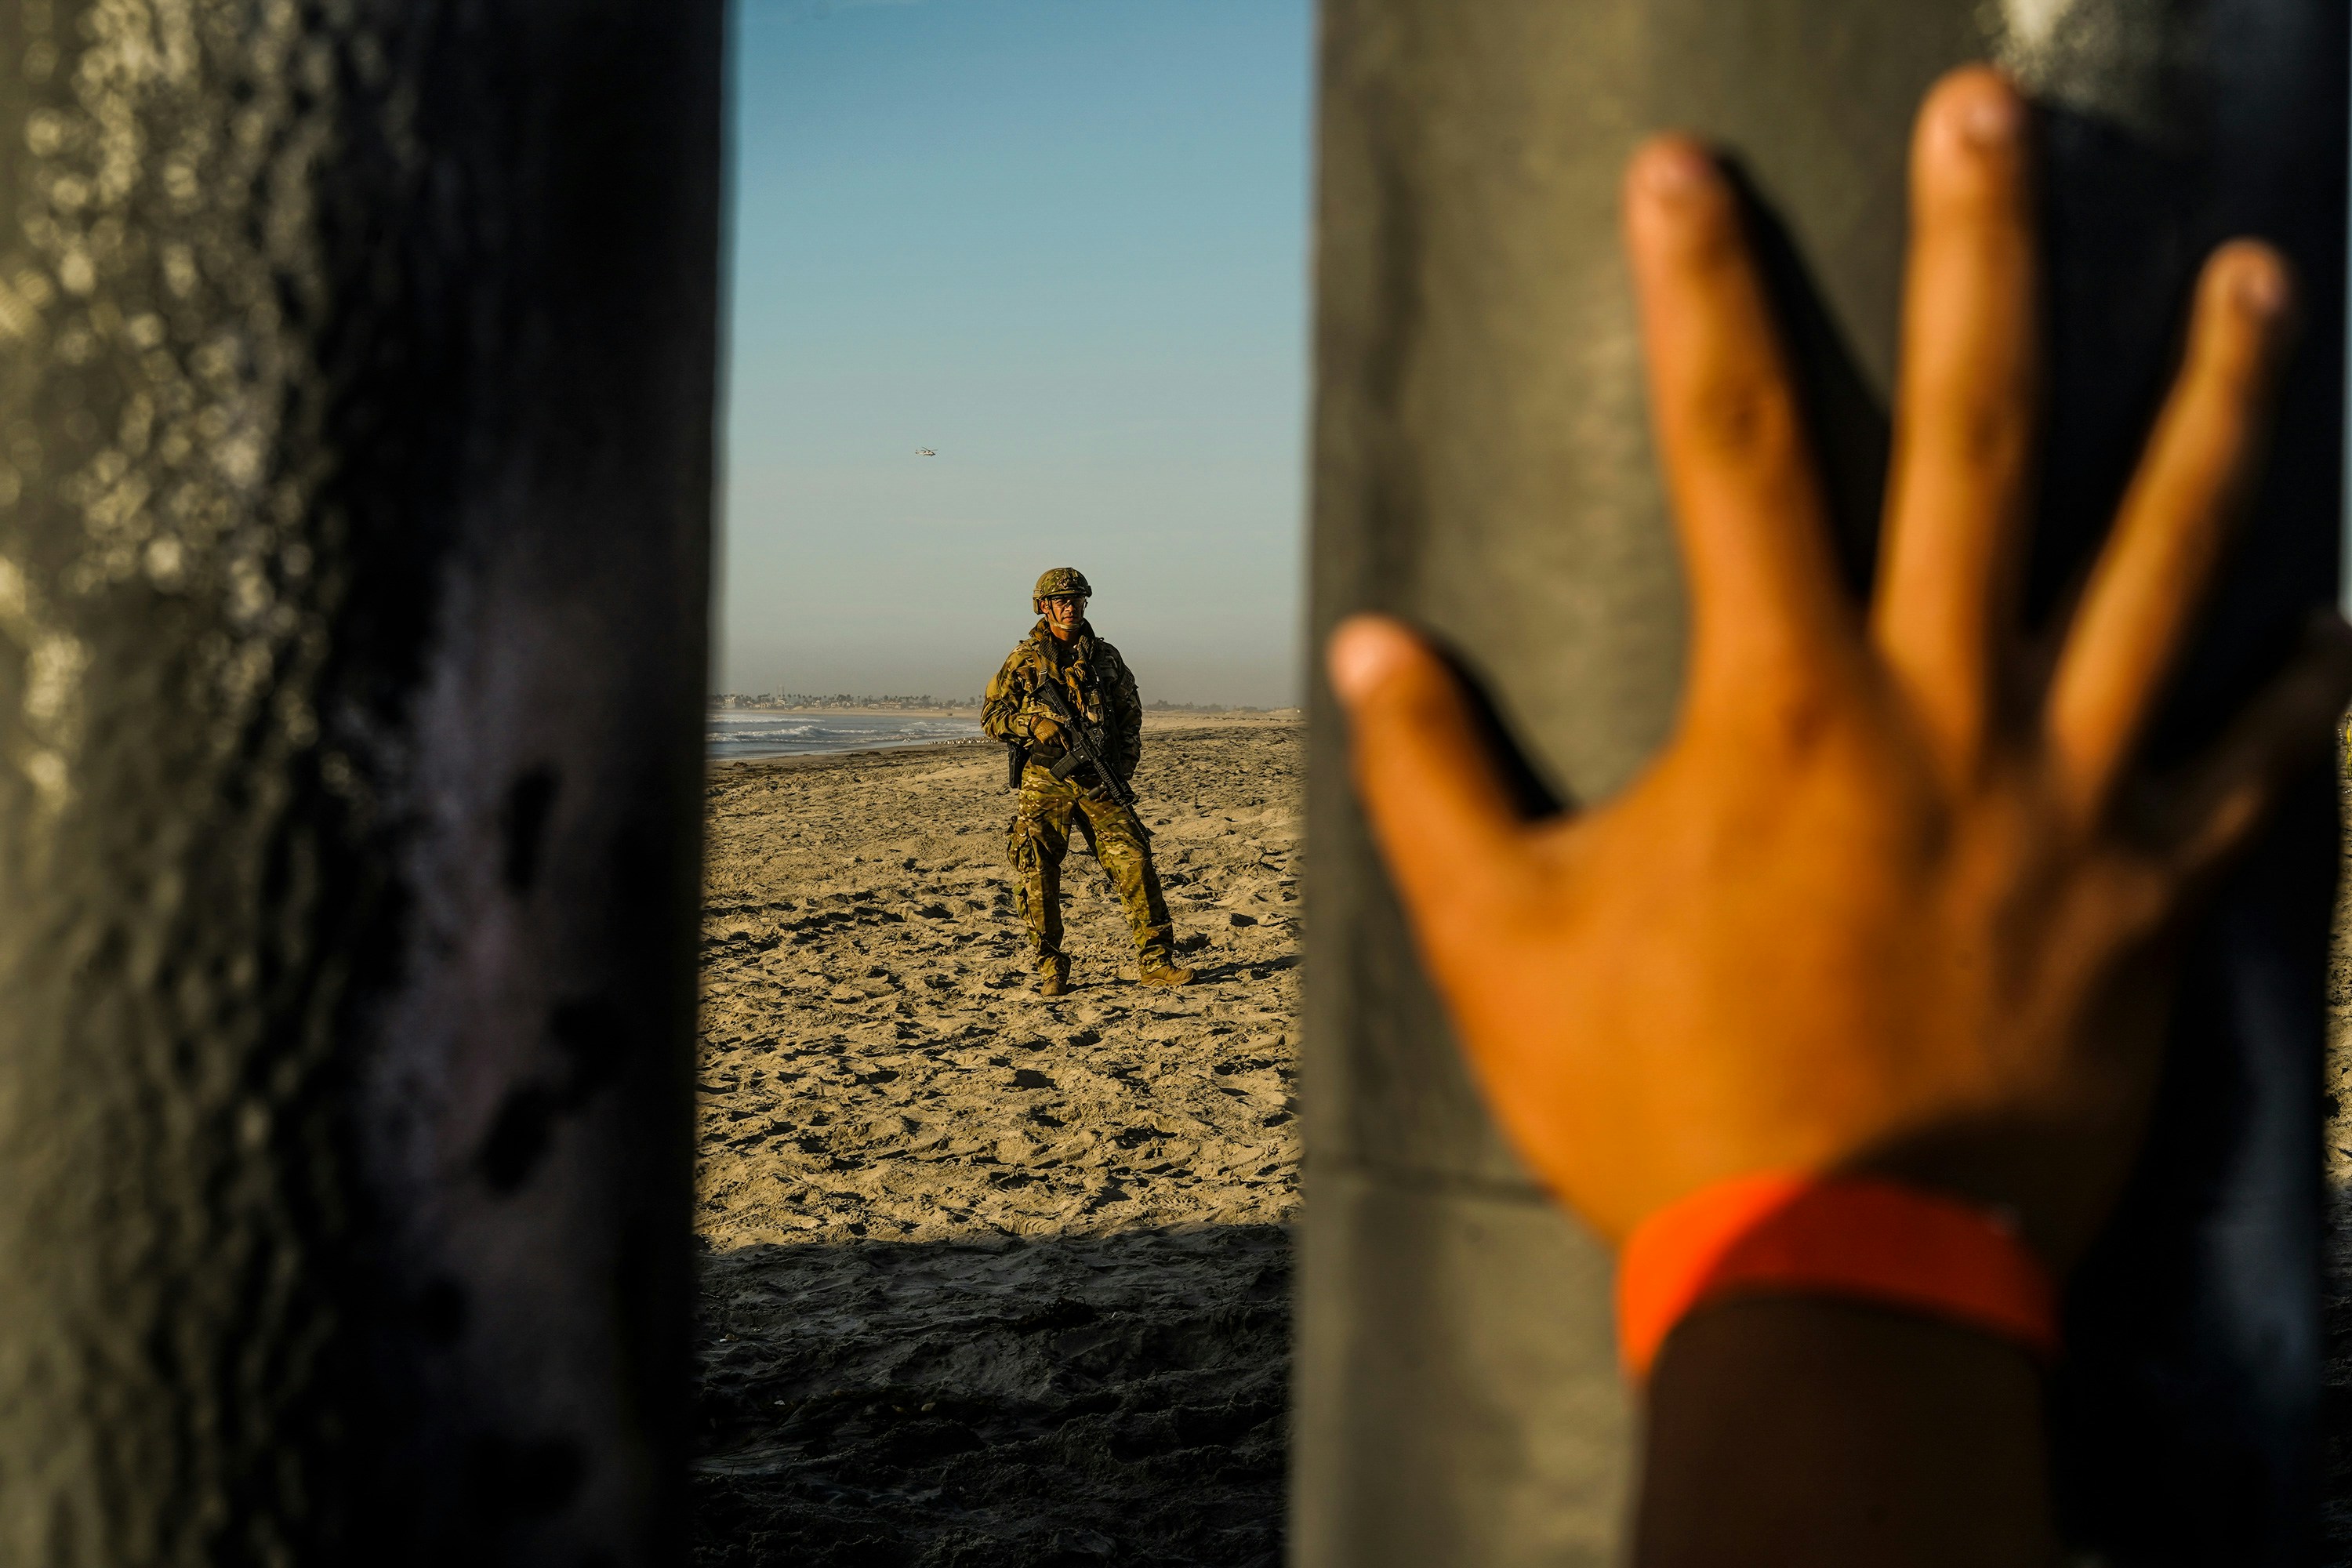 A soldier is seen on the US side of the border fence while a Honduran migrant's hand is placed on the border fence on Mexico side in Tijuana, Mexico on November 16, 2018.Thousands of Central American migrants, who are trying to go to the US, arrived in the US/Mexico border town of Tijuana in mid November 2018 however most of them have hard time to find a way to cross the border to the US. Go Nakamura